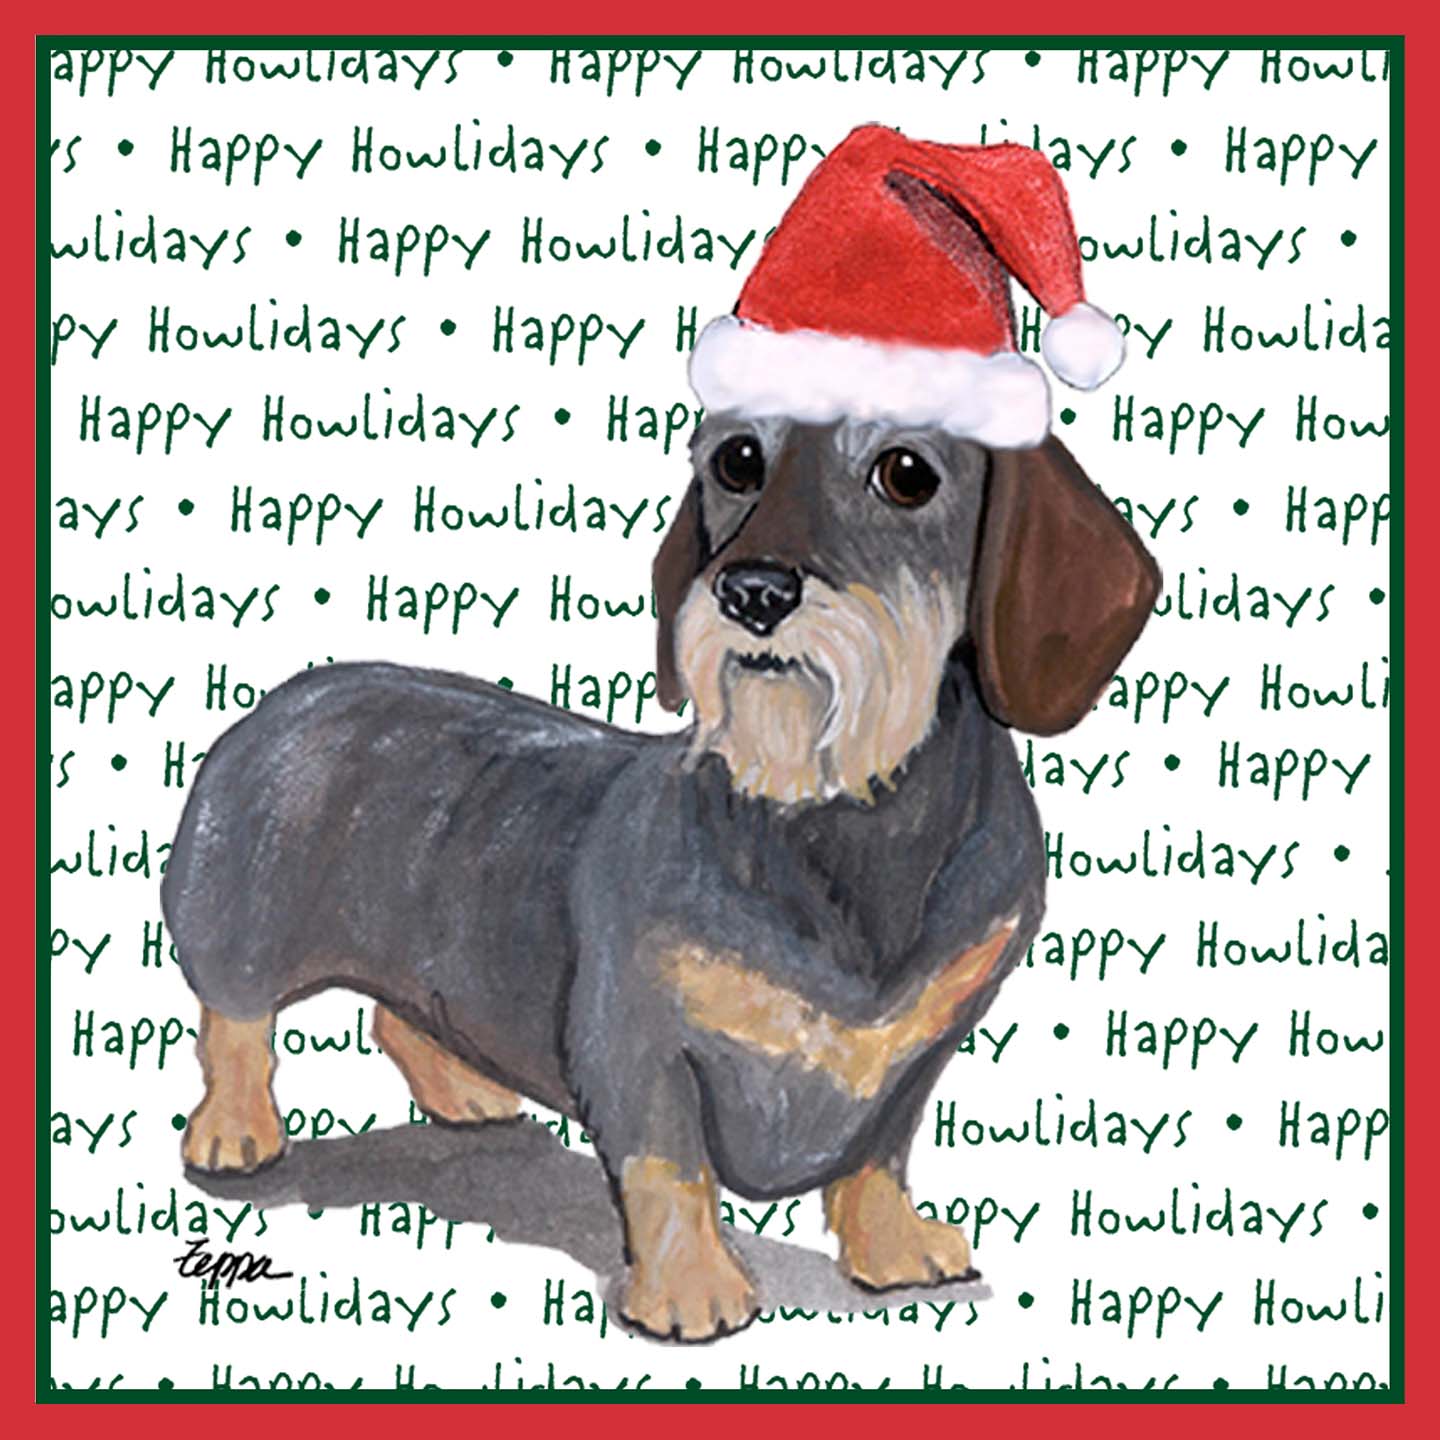 Dachshund (Wire Haired) Happy Howlidays Text - Adult Unisex T-Shirt